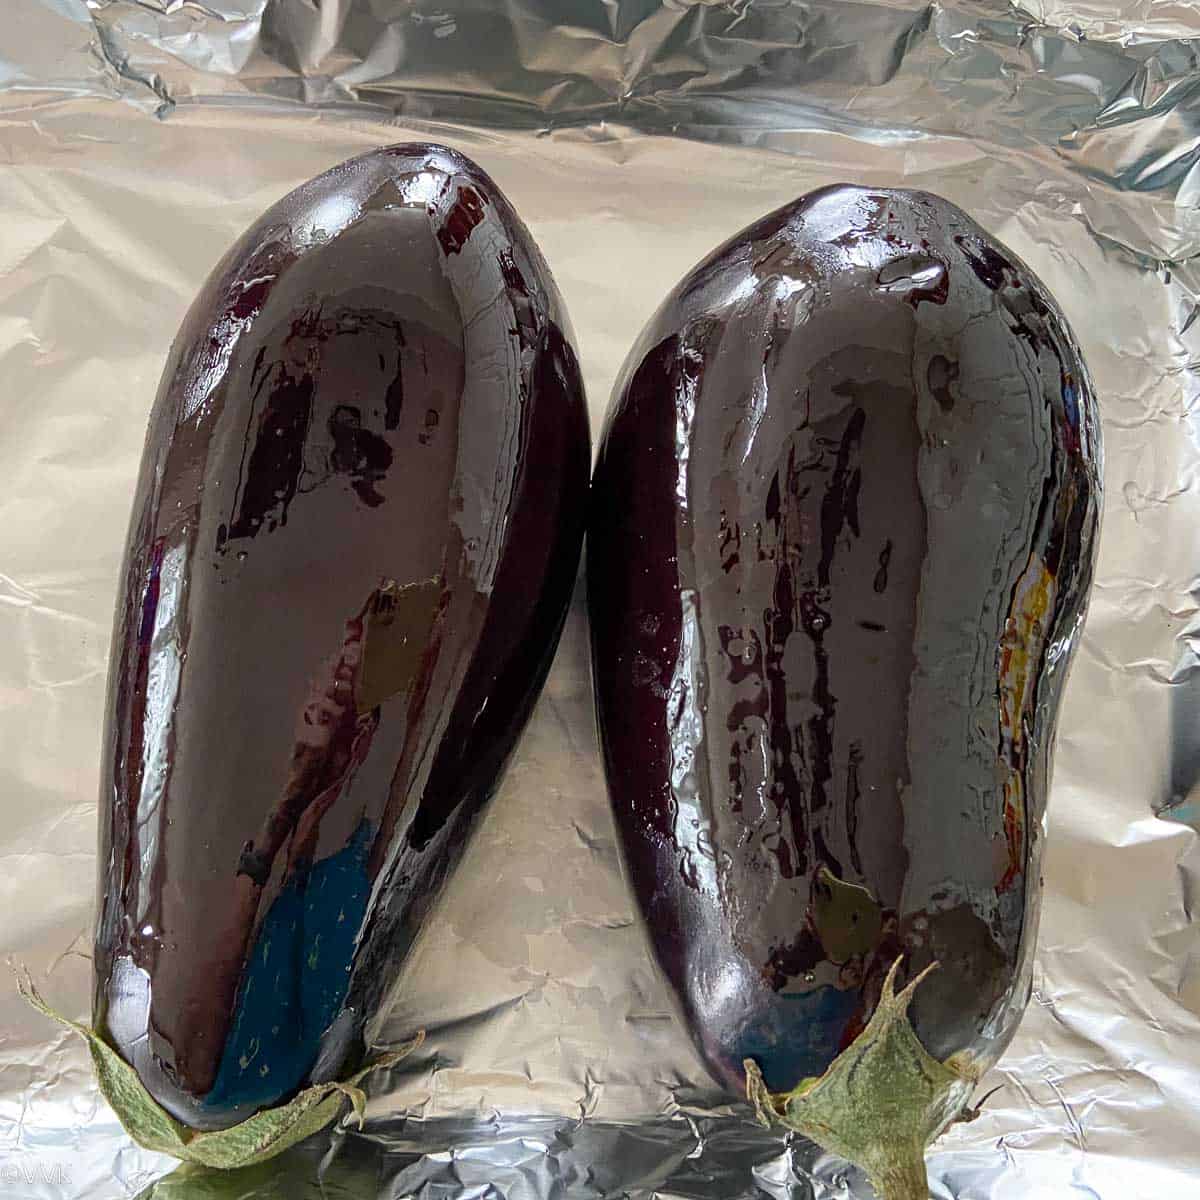 eggplant with oil applied for baking